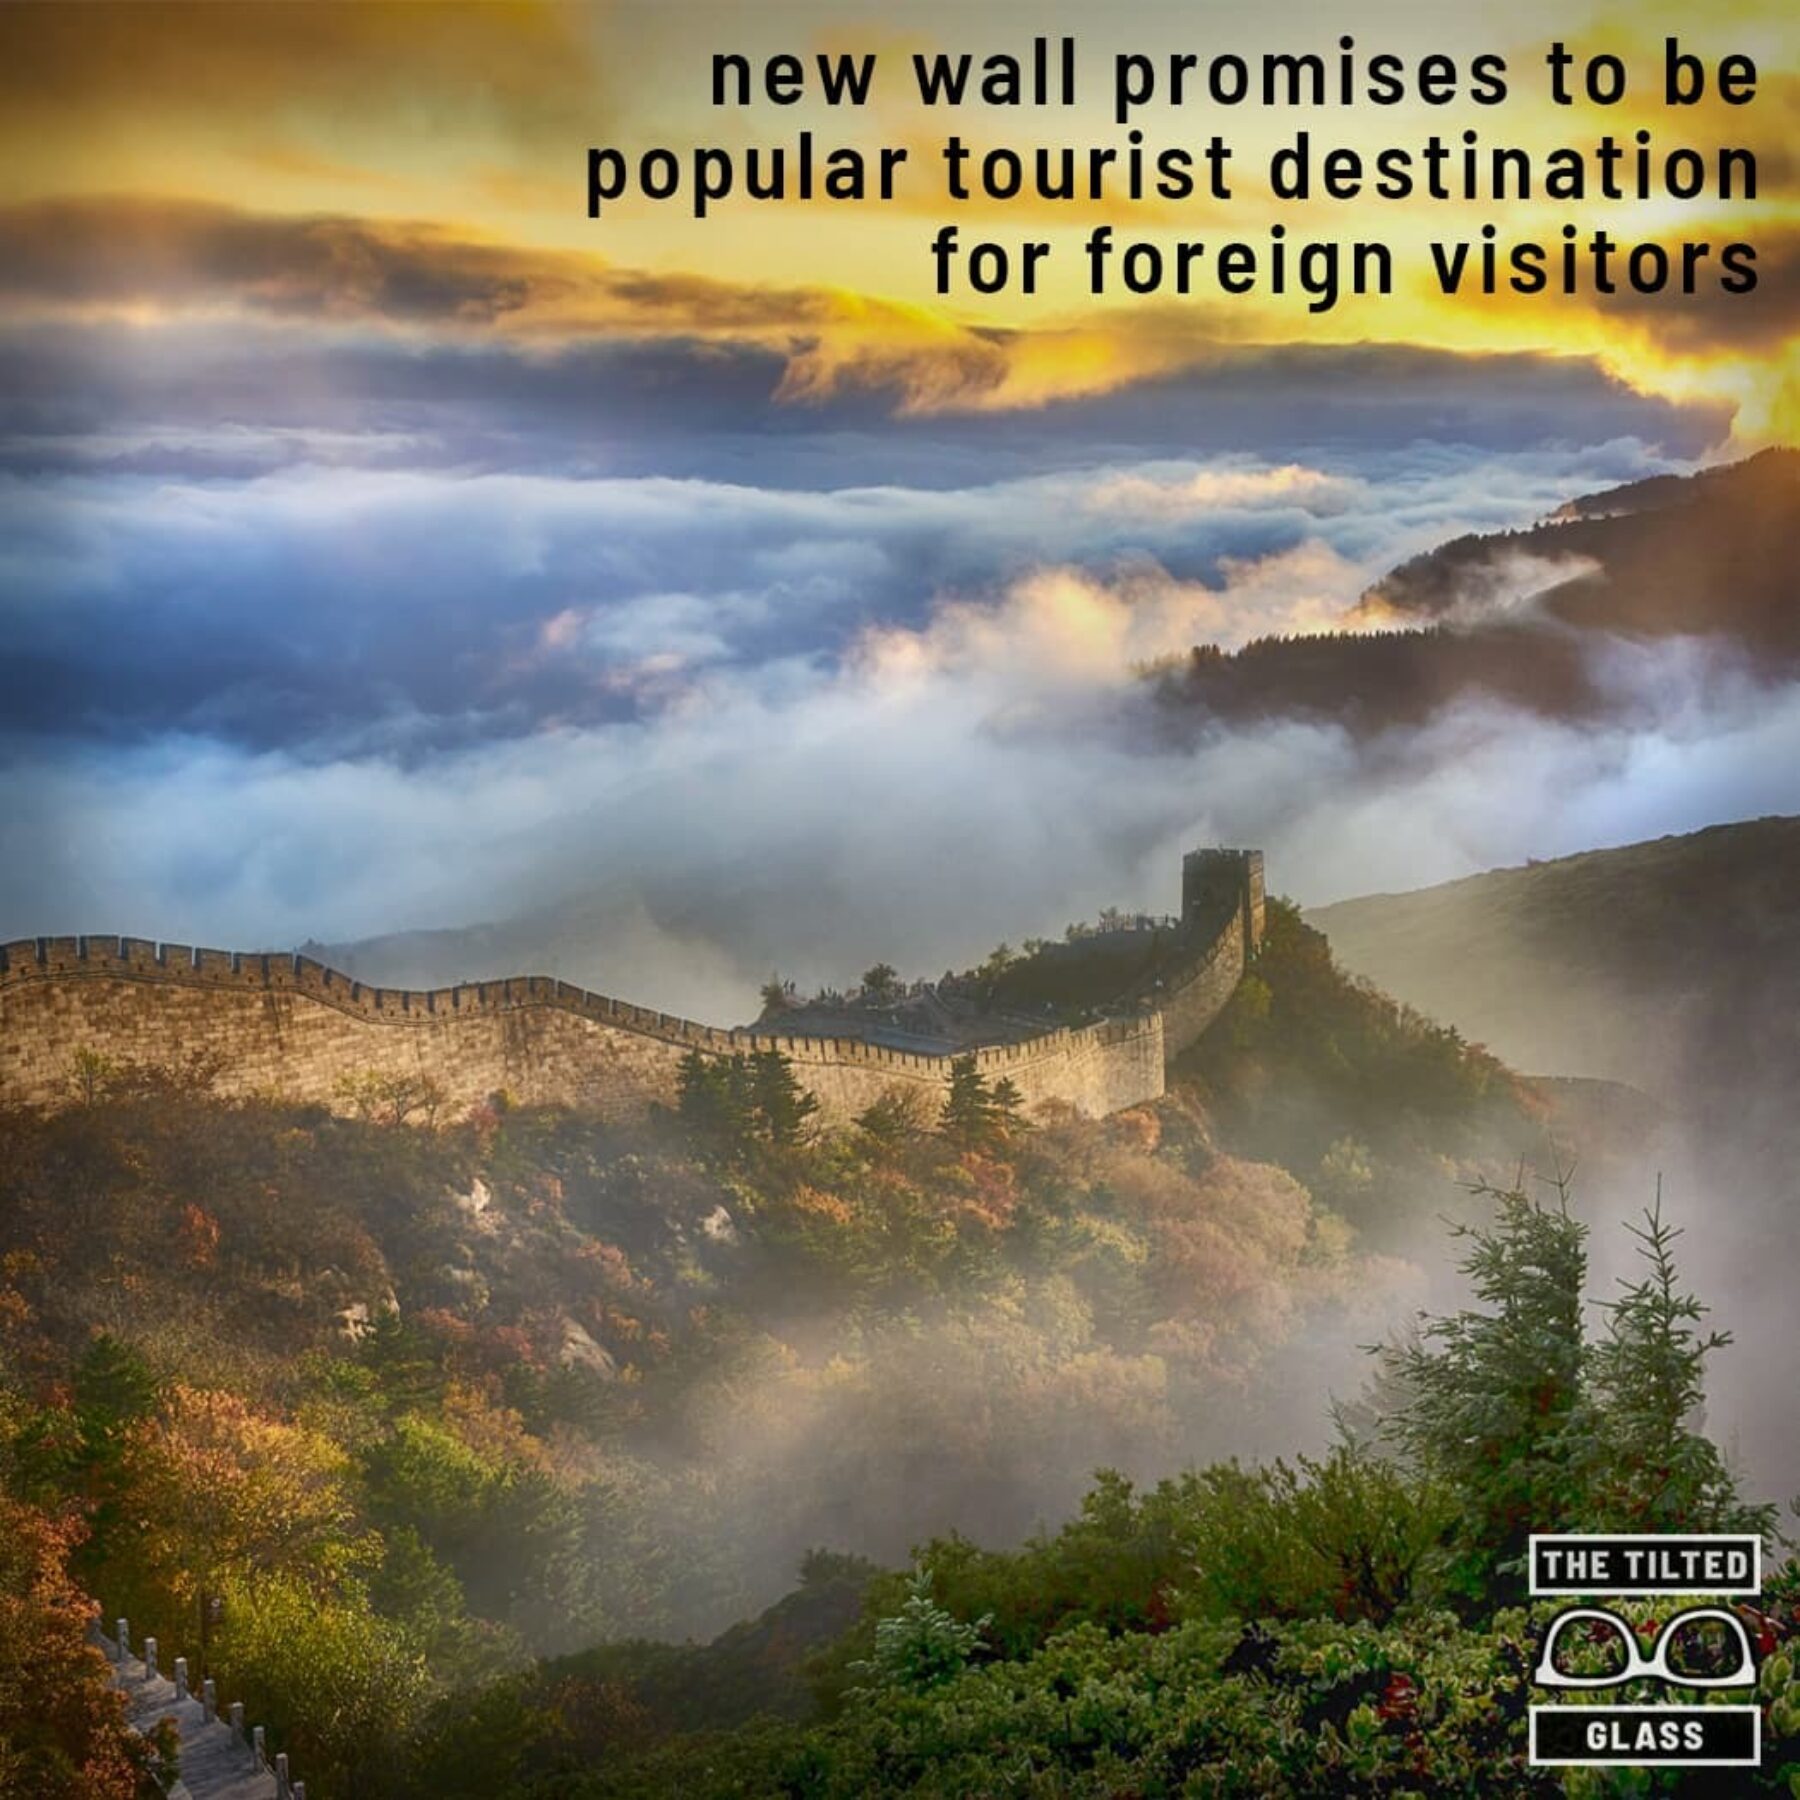 New wall promises to be popular tourist destination for foreign visitors